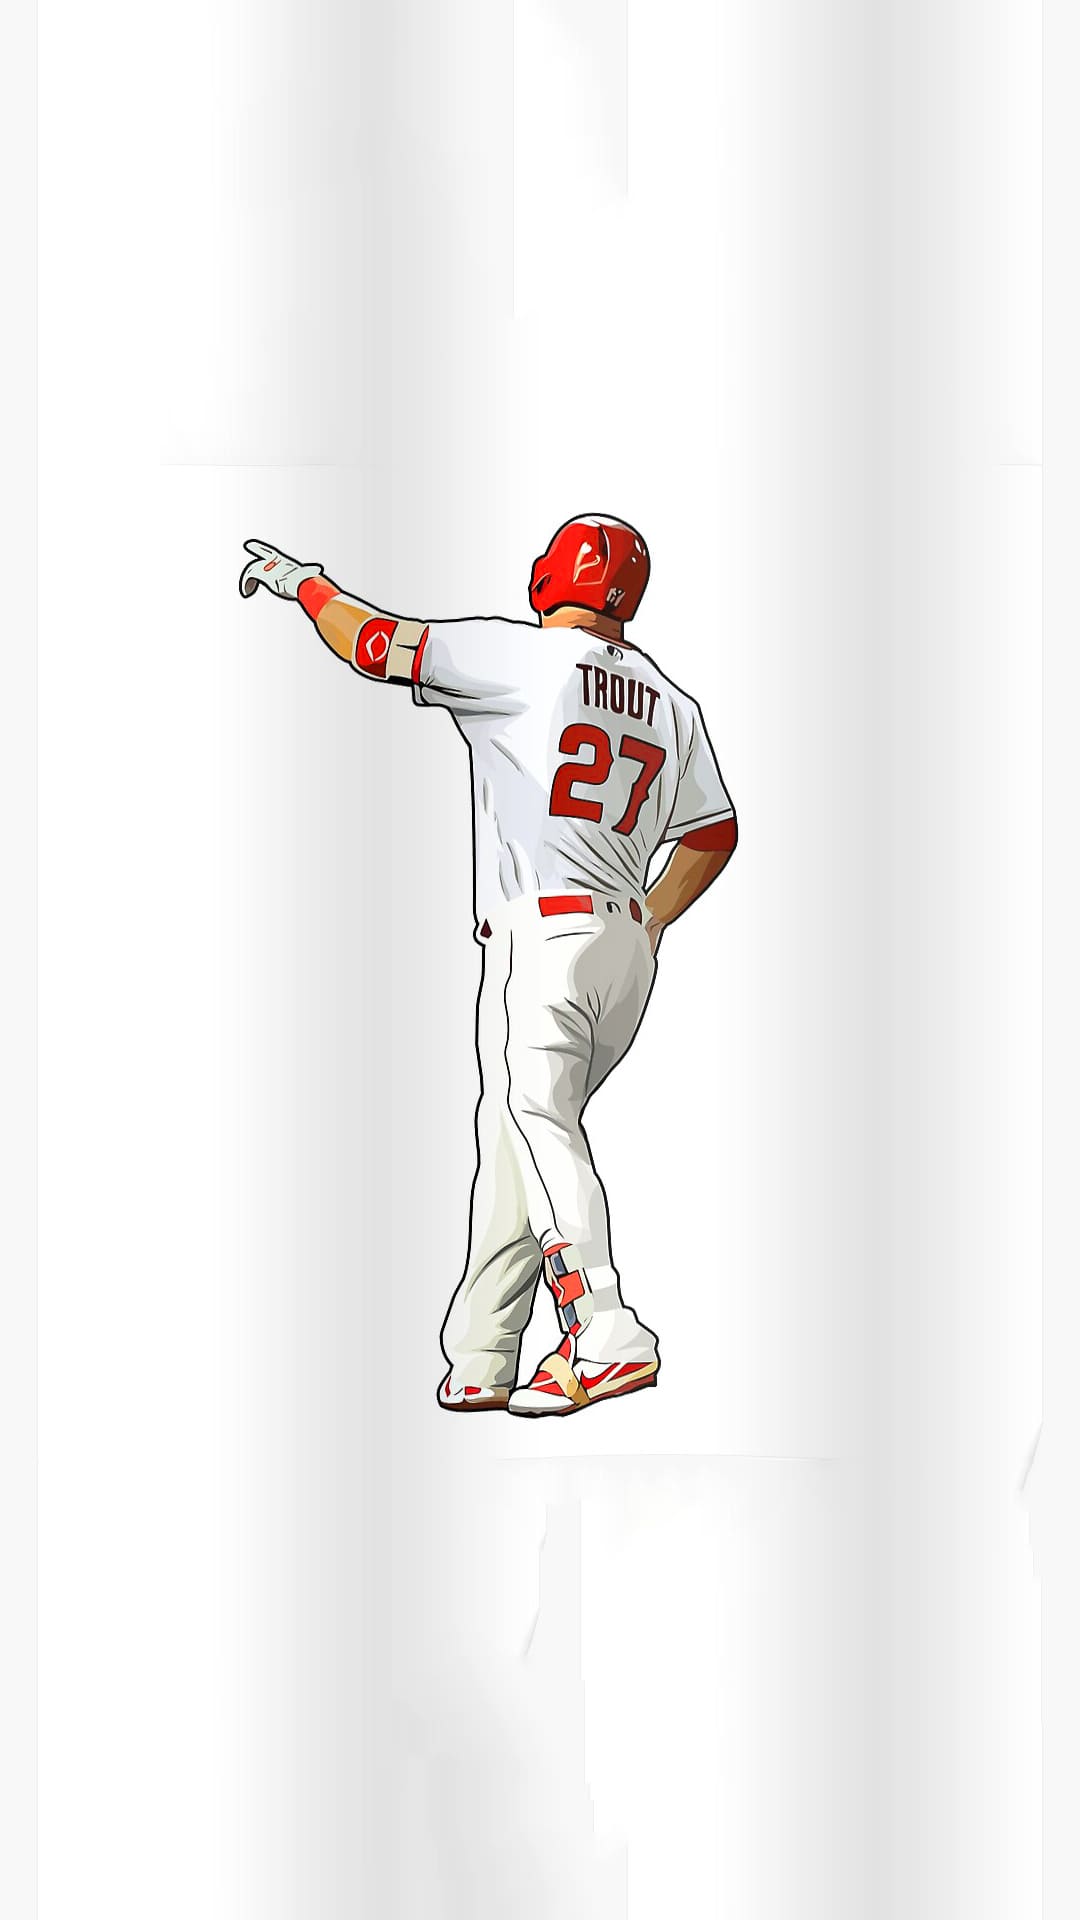 Mike Trout Wallpaper - NawPic